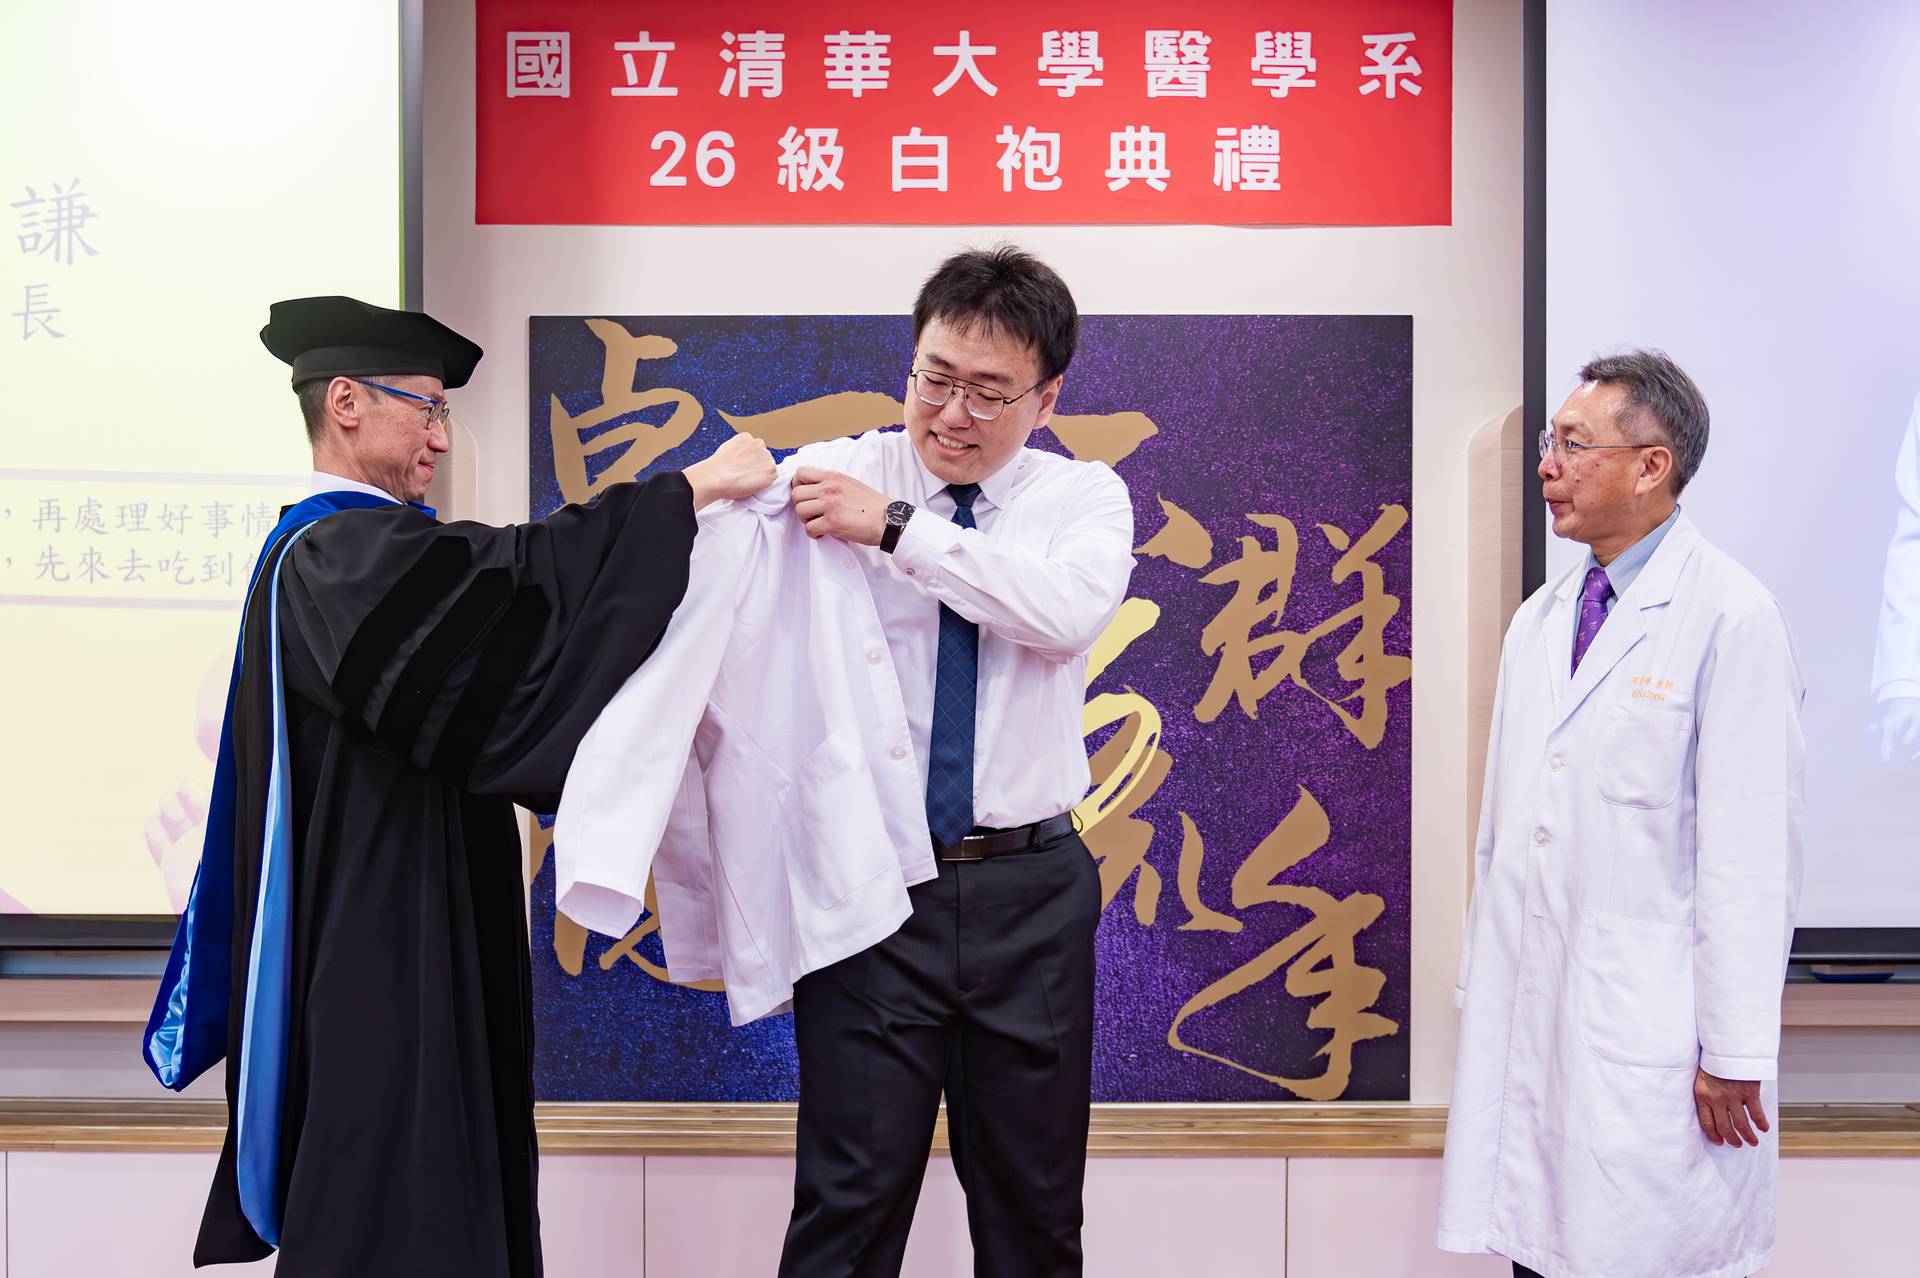 President W. John Kao (高為元) (left) adorned Ho-Chien Shen (沈和謙), a member of the first class of medical students at NTHU, with a white coat.